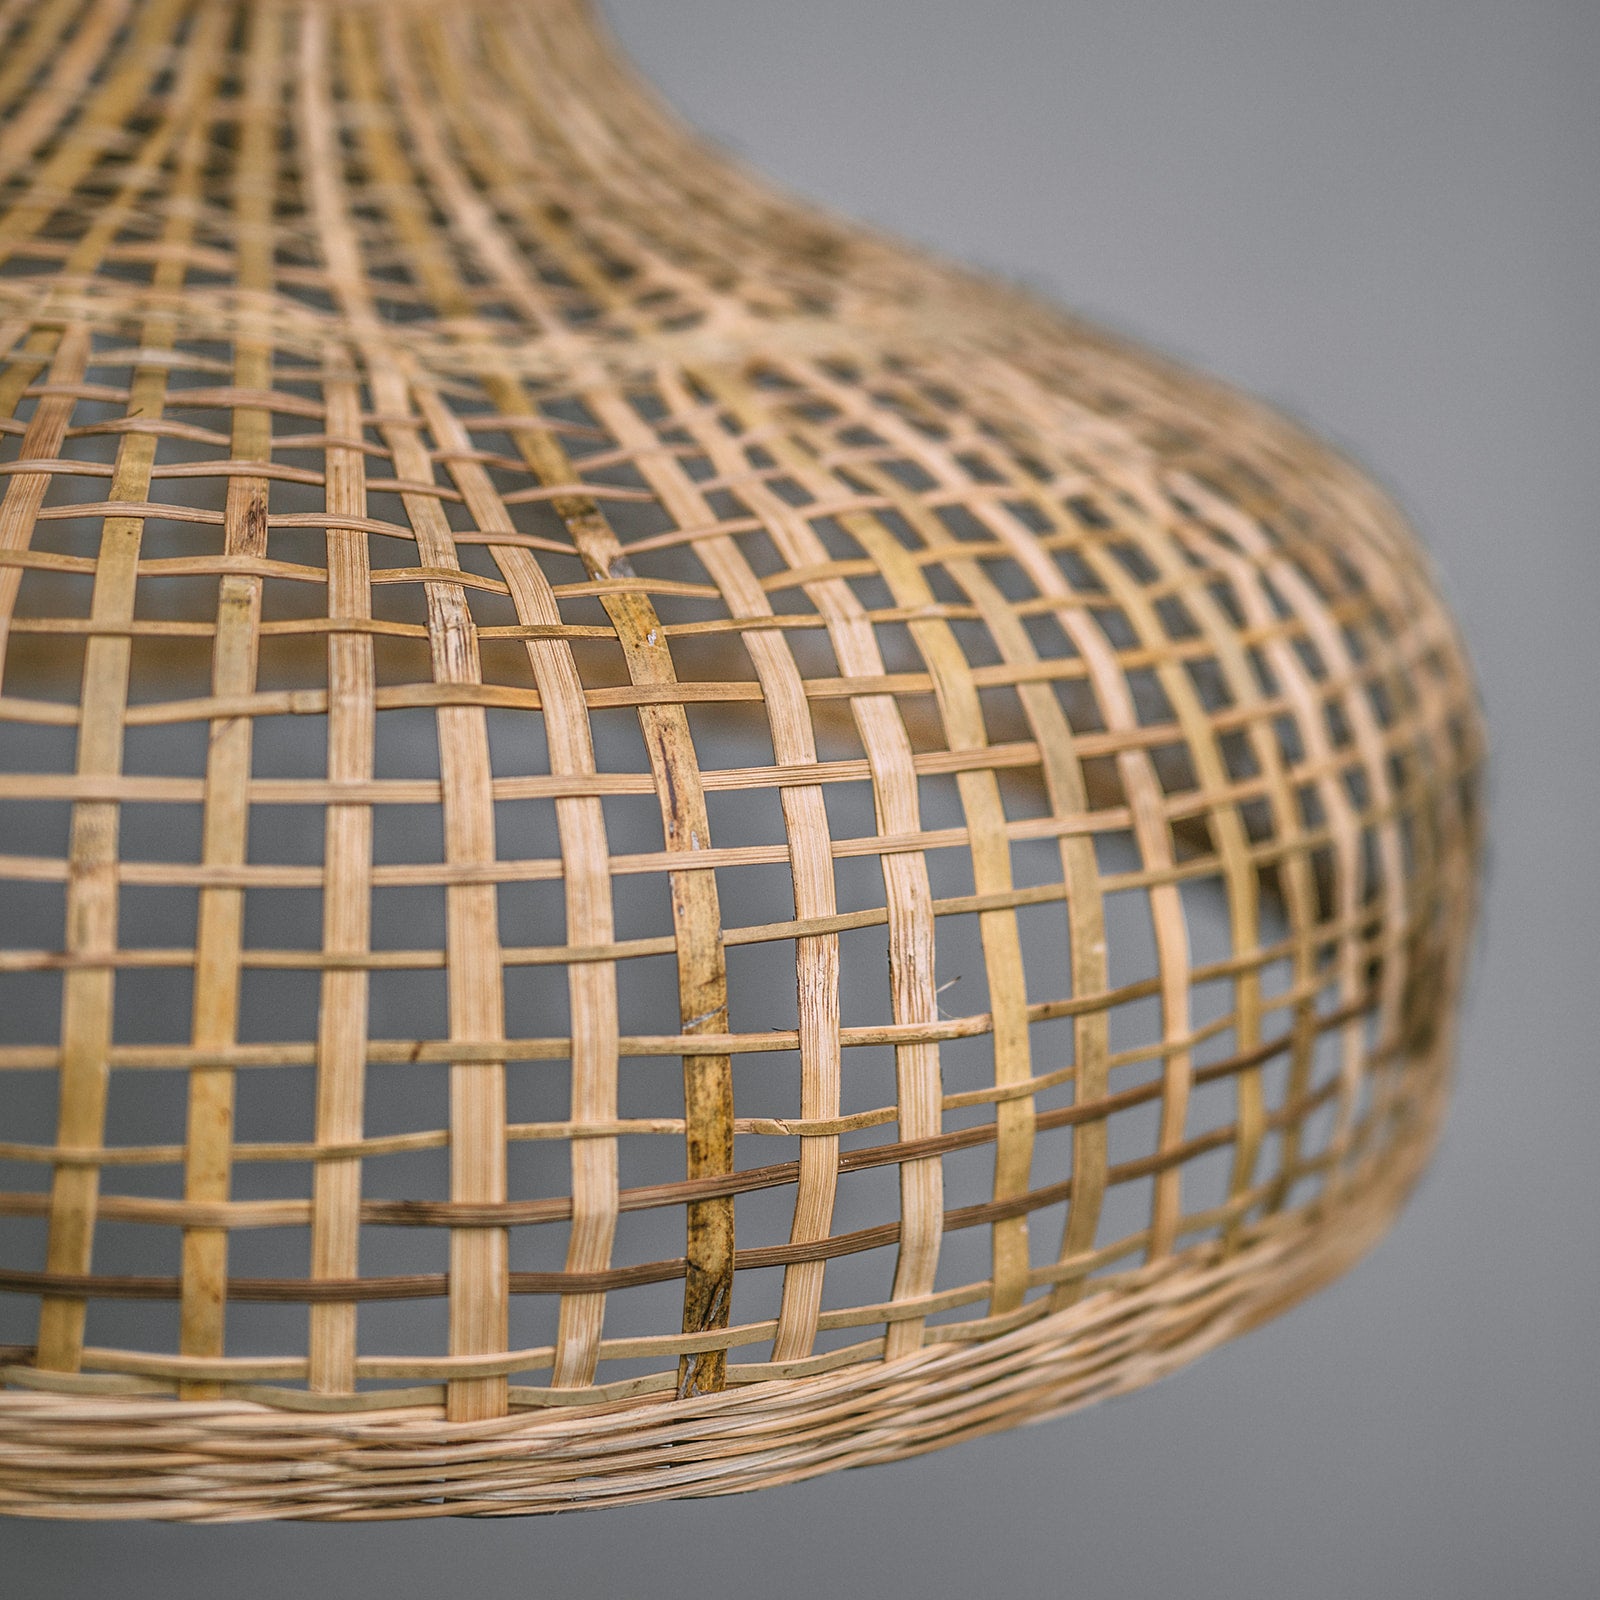 Bamboo pendant light. Close-up-photo-of-Coastal-Hamptons-lighting-style-natural-bamboo-pendant-light-showing-detail-in-open-weave-design